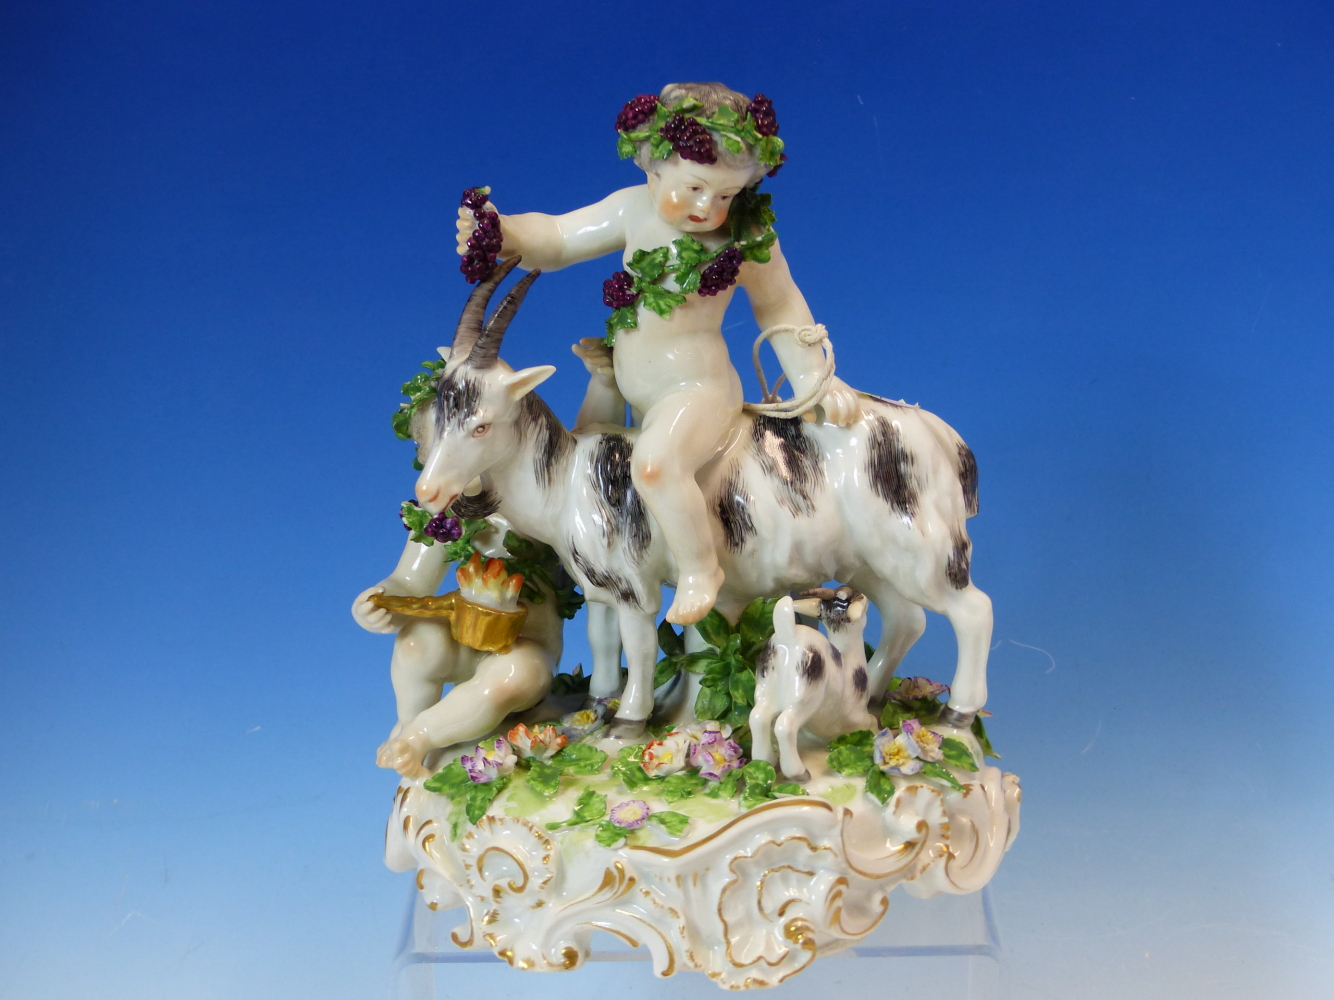 A CONTINENTAL GROUP OF BACCHIC PUTTI, ONE DRAPED IN GRAPES RIDES A GOAT WHICH SUCKLES HER KID. H